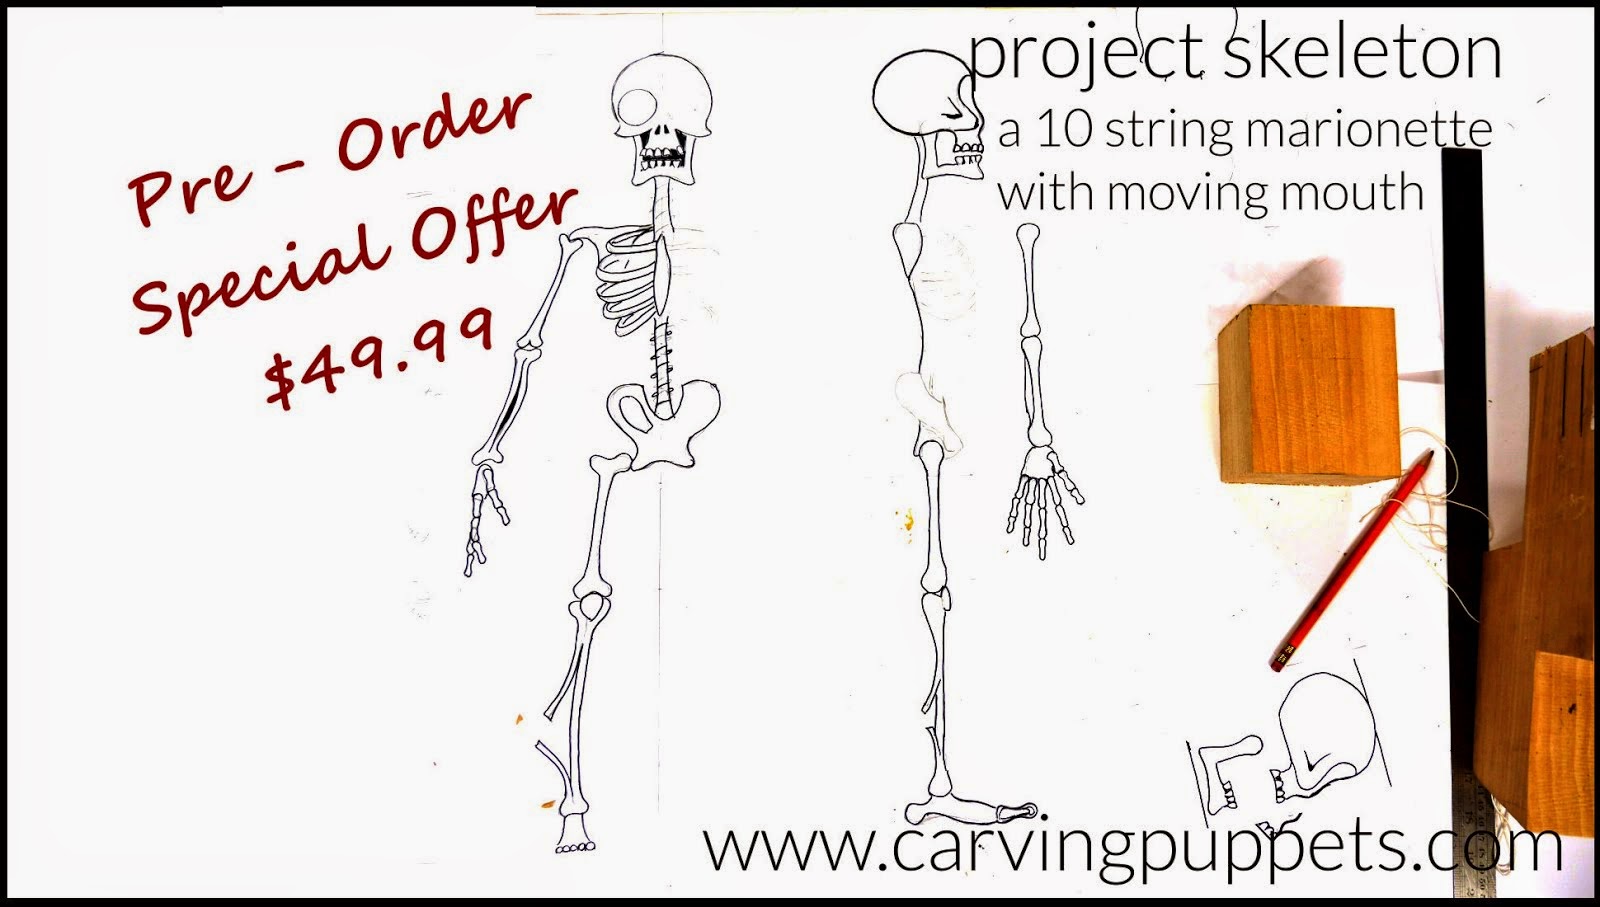 Making Wooden Puppets - Video Tutorial